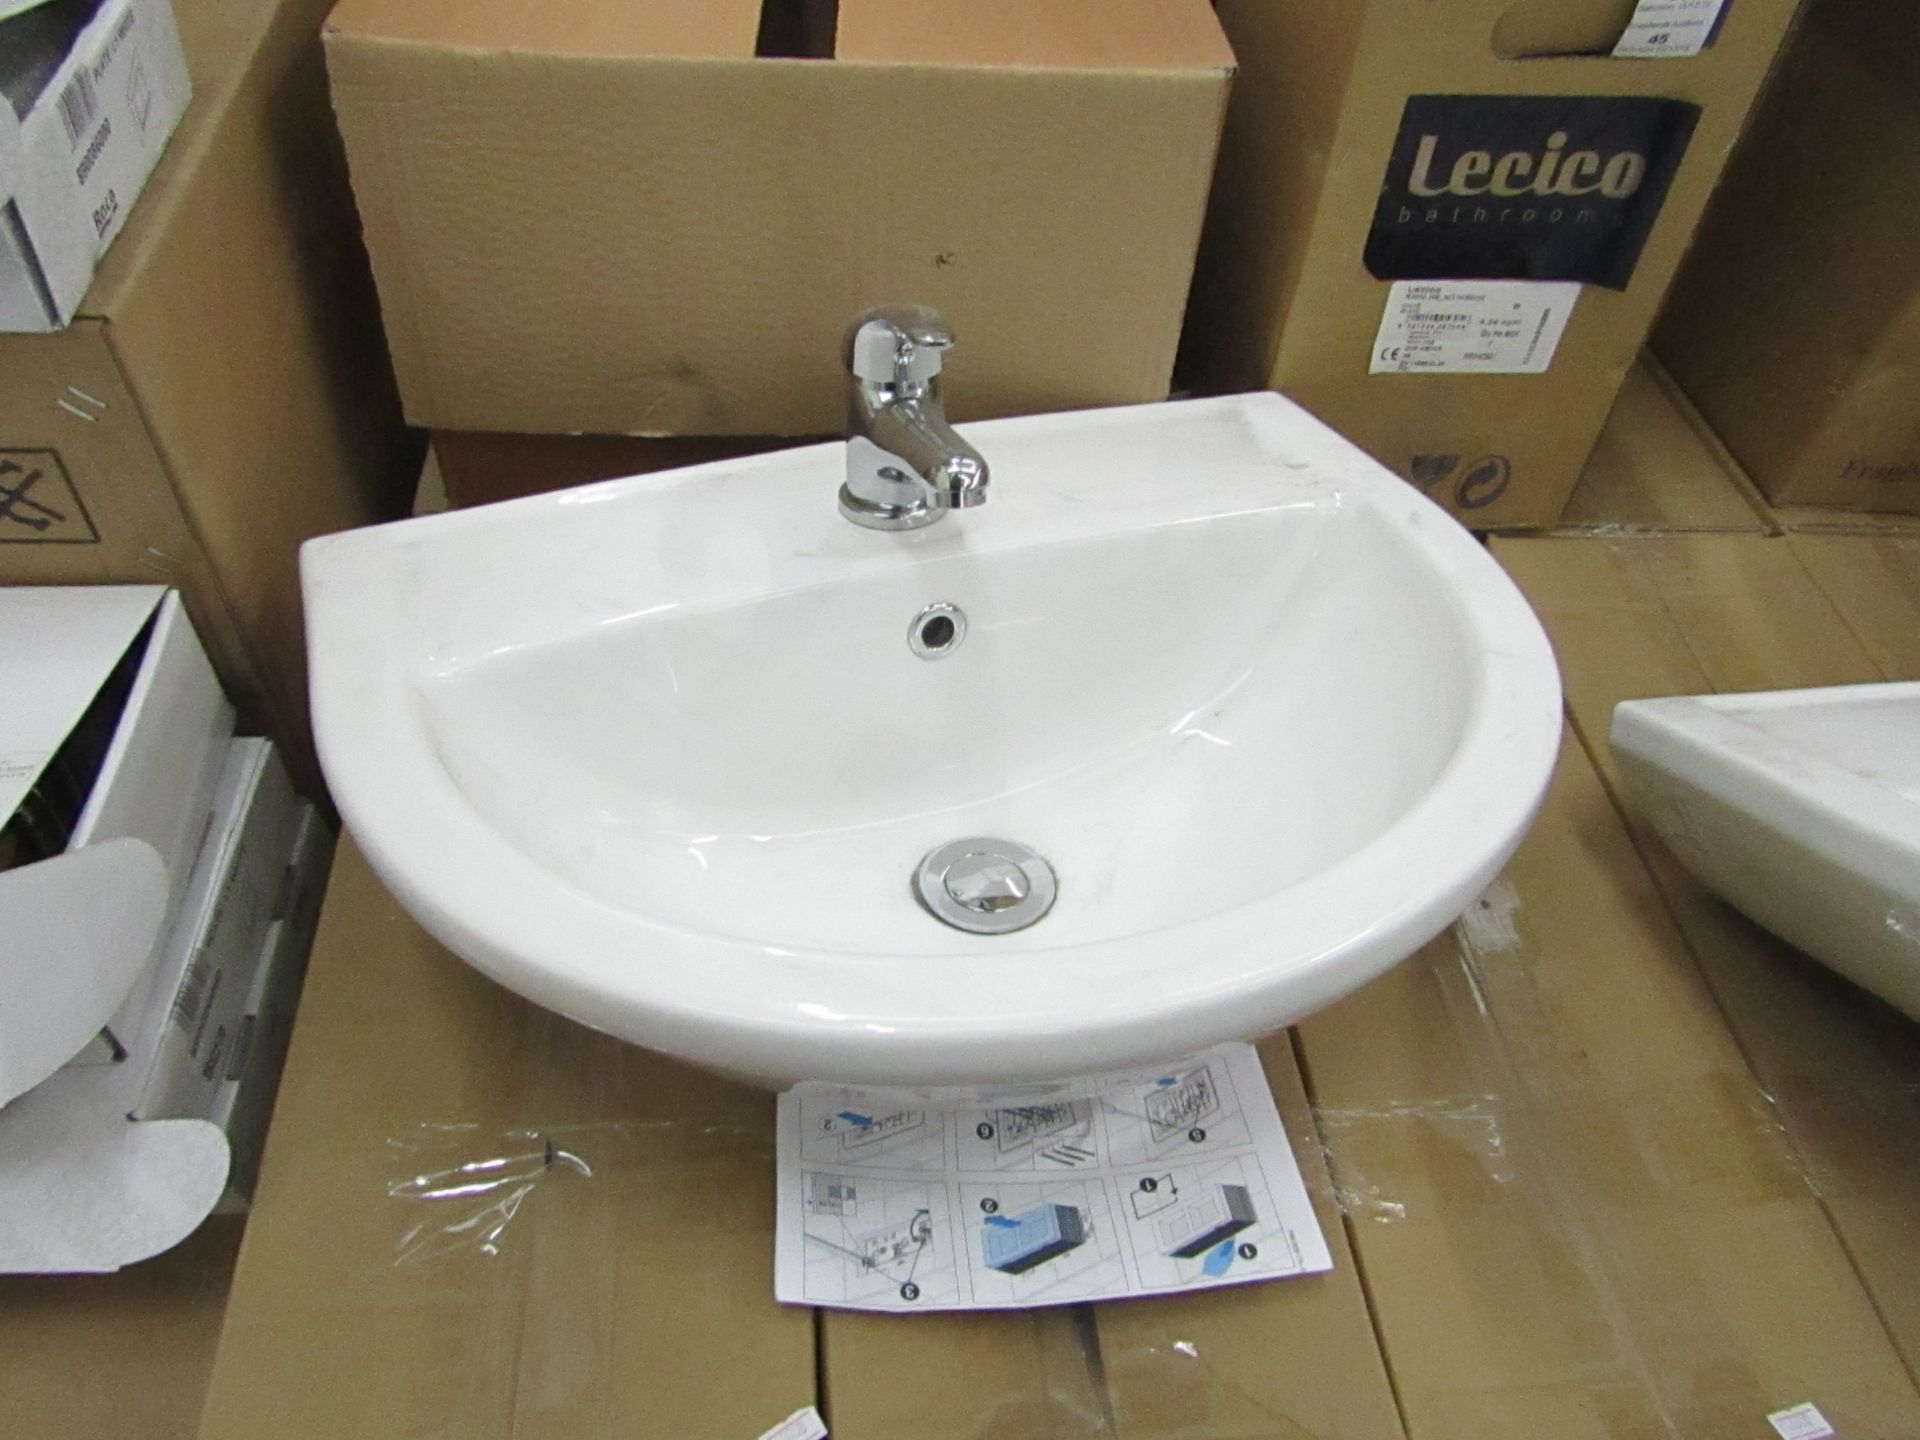 Lecico Senner 500mm 1 tap hole sink woth mono block mixer tap, new and boxed.